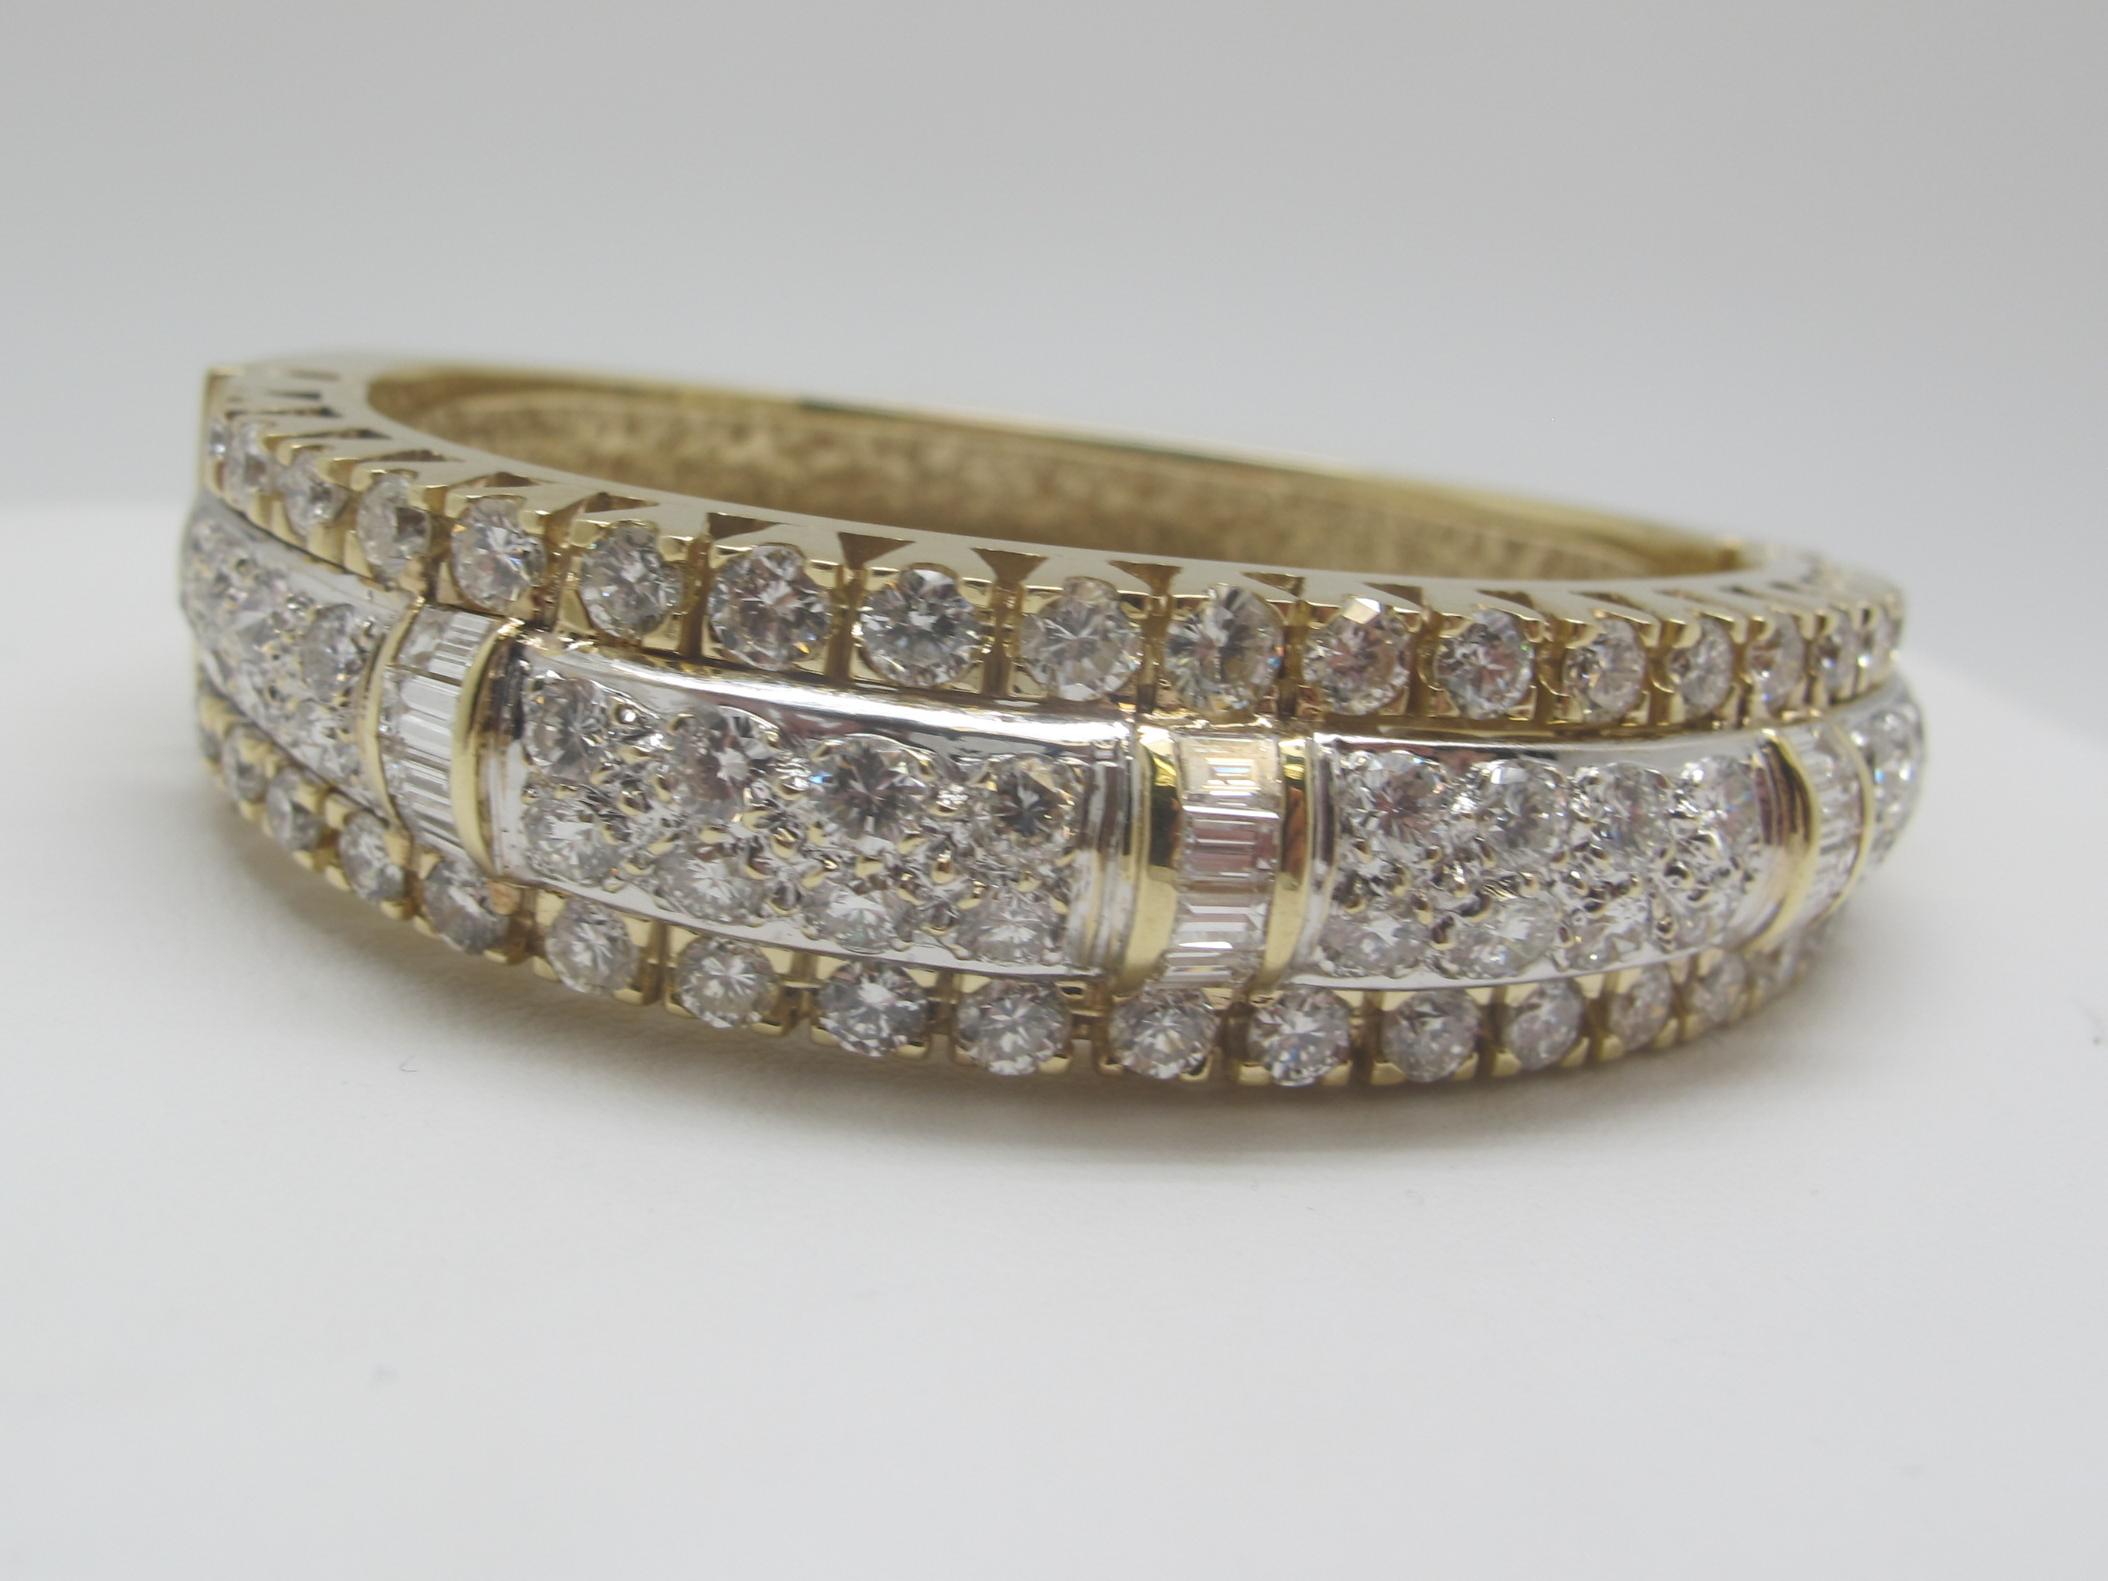 Wow!  This beautiful bangle bracelet packs a punch, set with 70 round brilliant cut  and baguette cut diamonds that total at least 10.00 carats in combined weight.  These diamonds have average color grade 